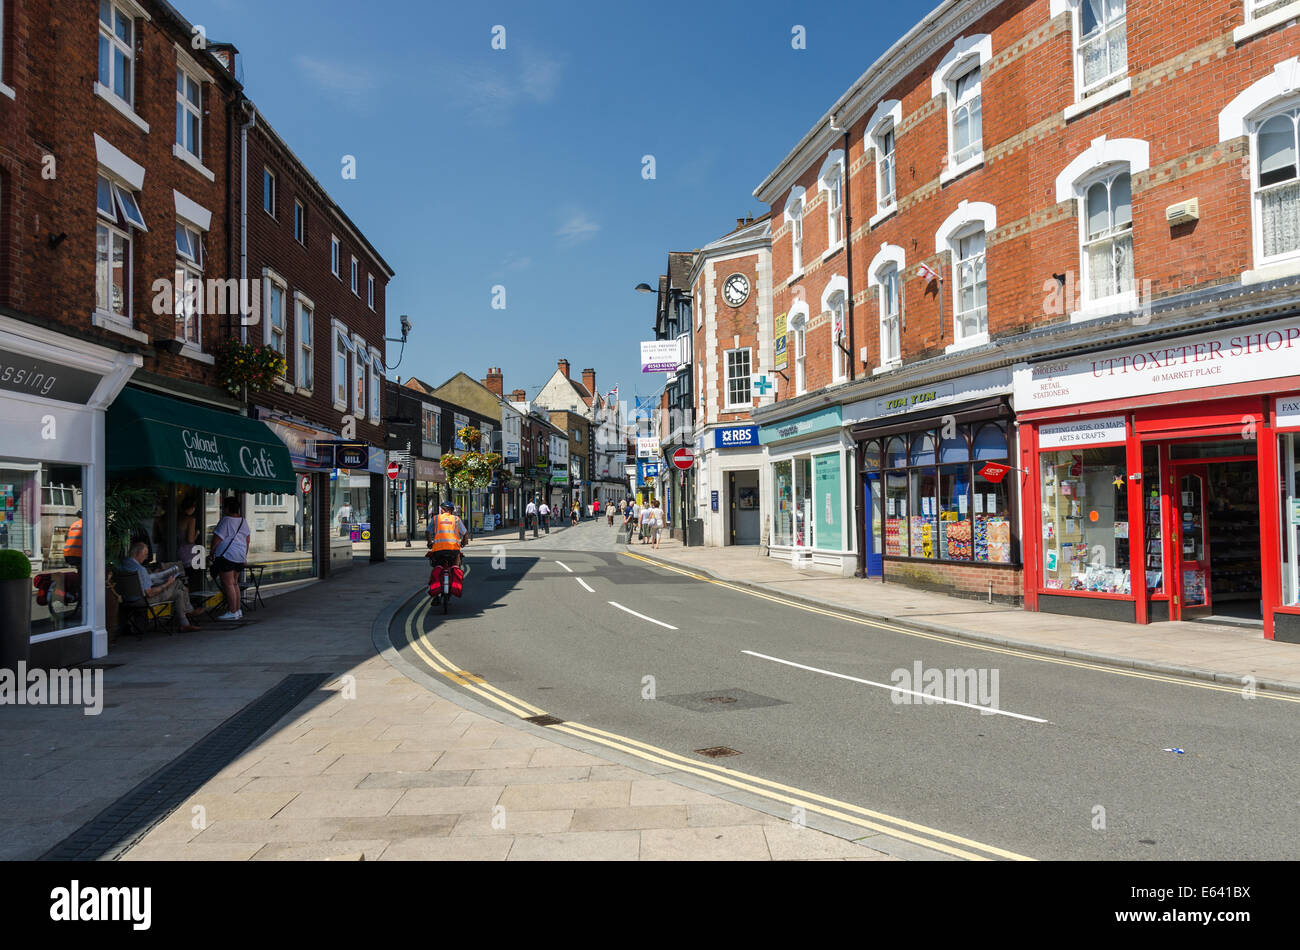 View down High Street from Market Place in the Staffordshire market town of Uttoxeter Stock Photo